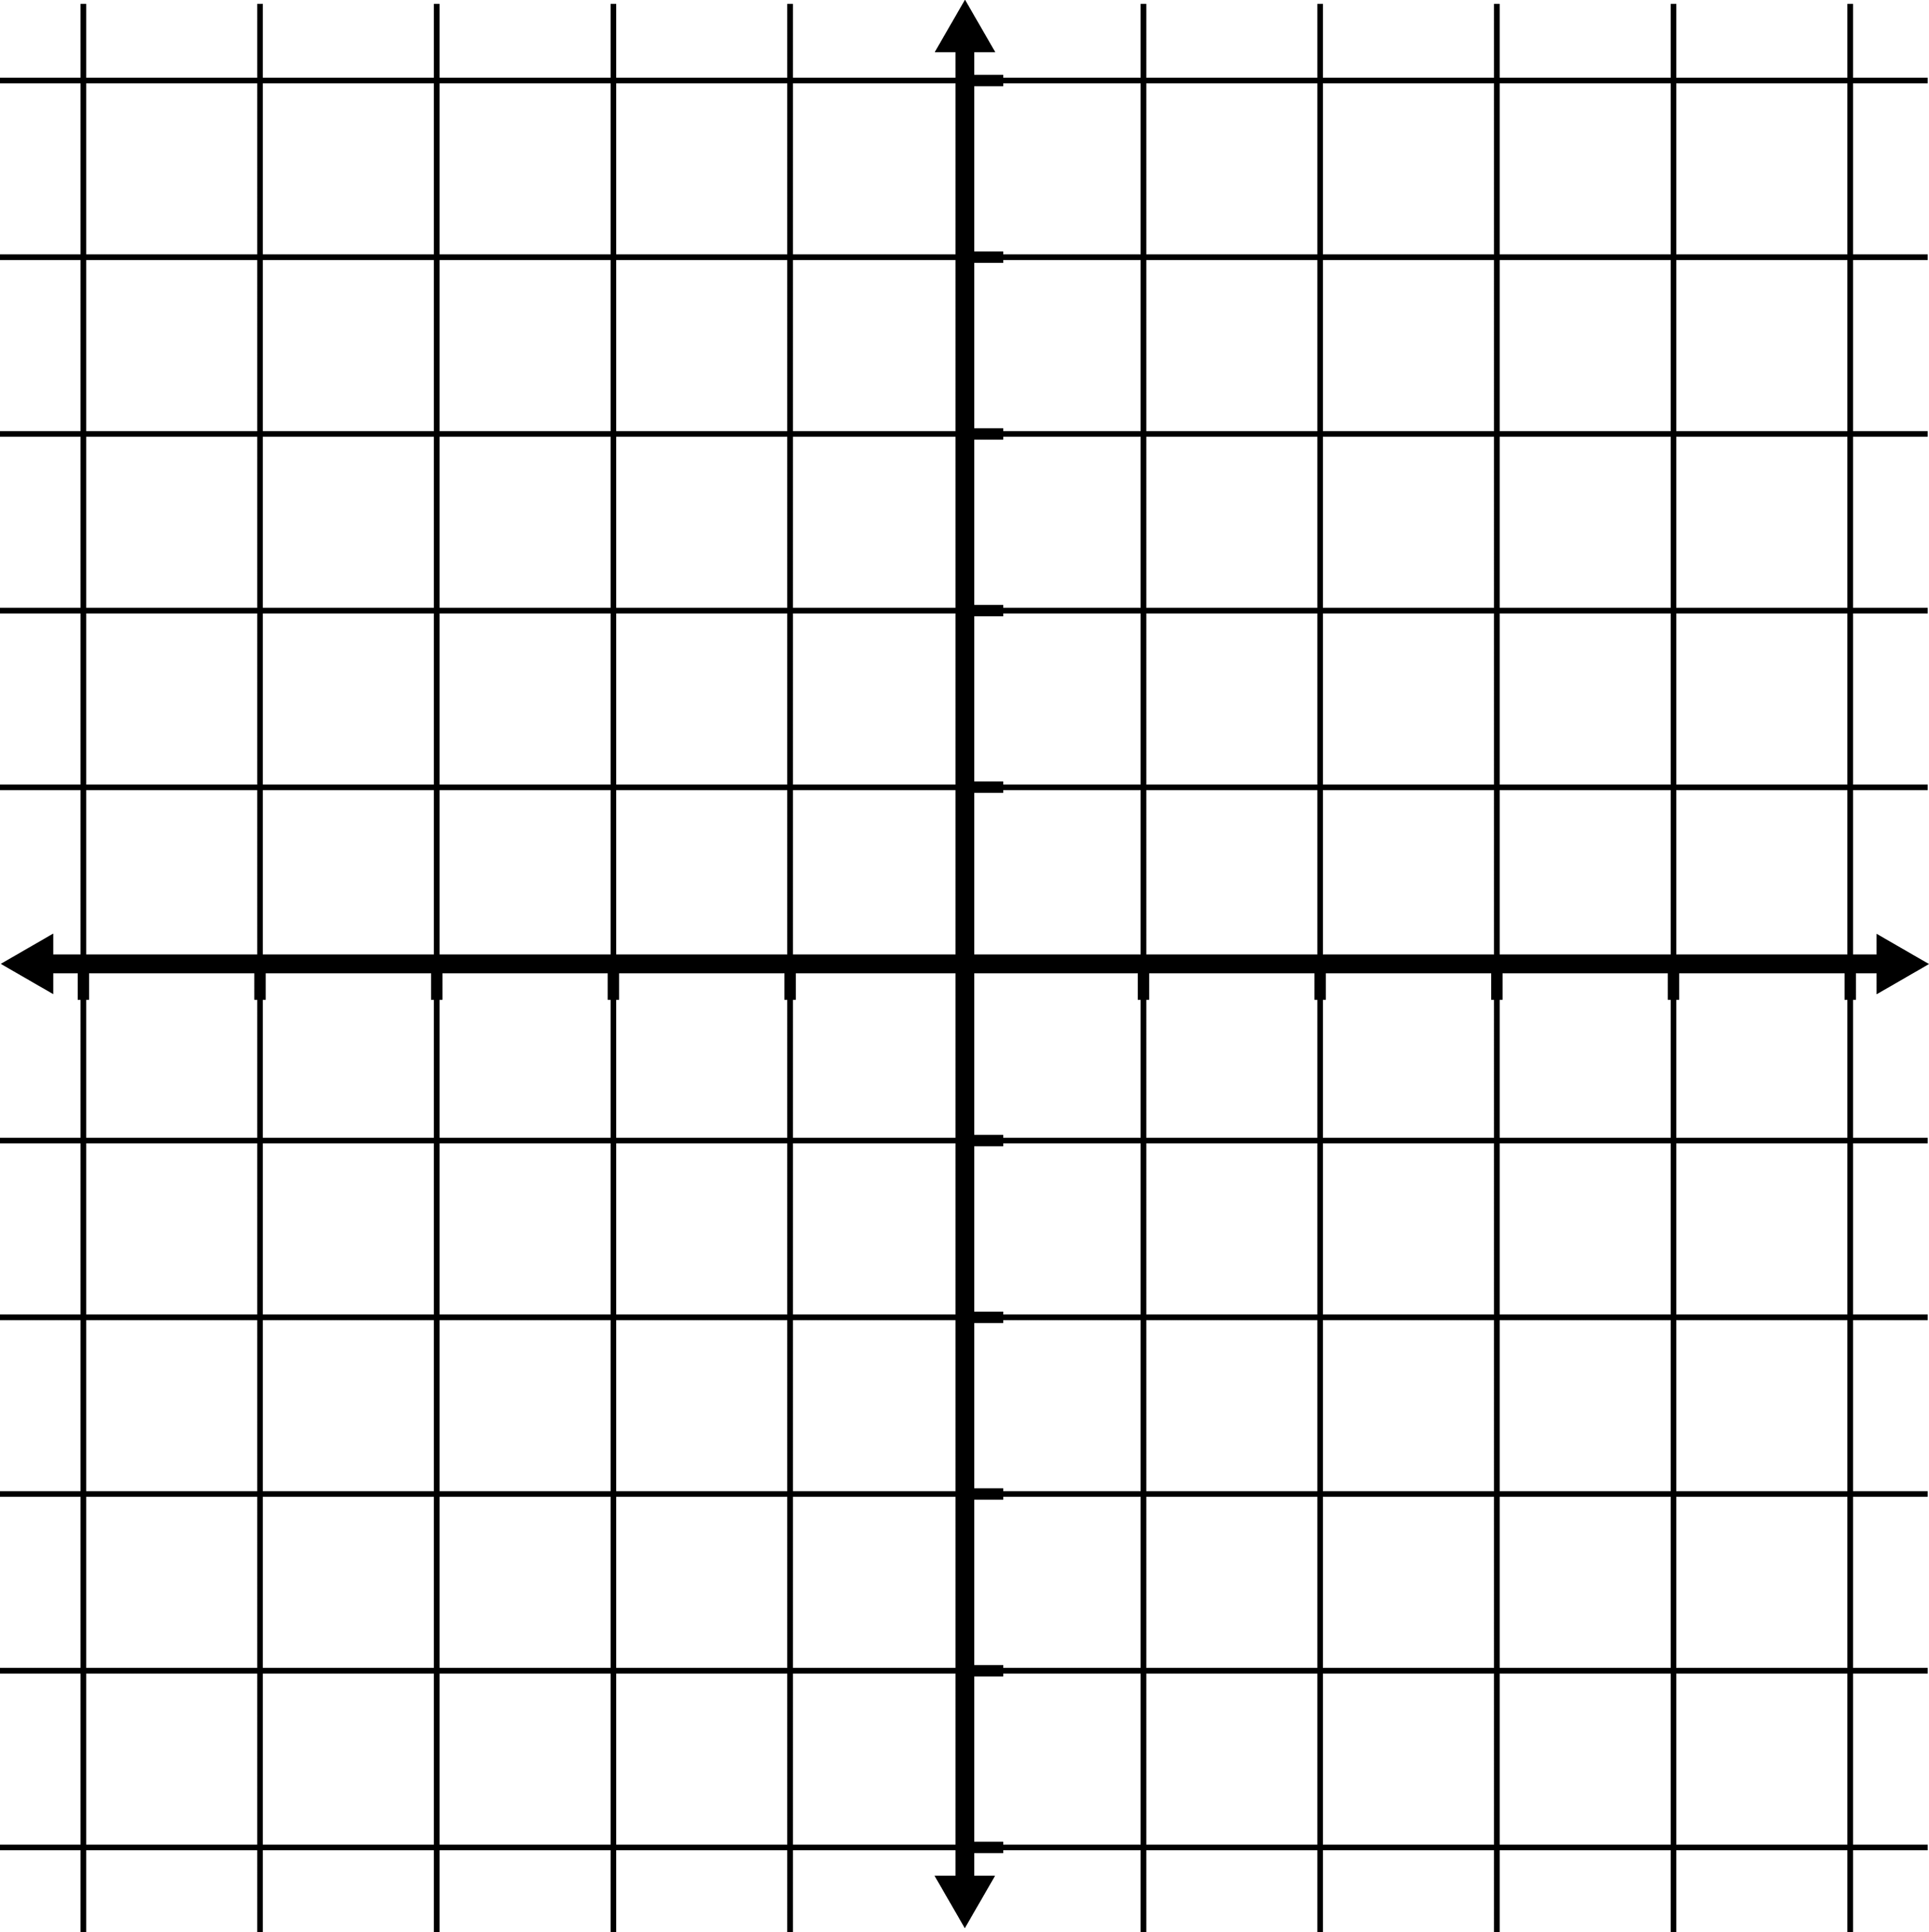 -5 To 5 Coordinate Grid With Grid Lines Shown, But No Labels | ClipArt ETC